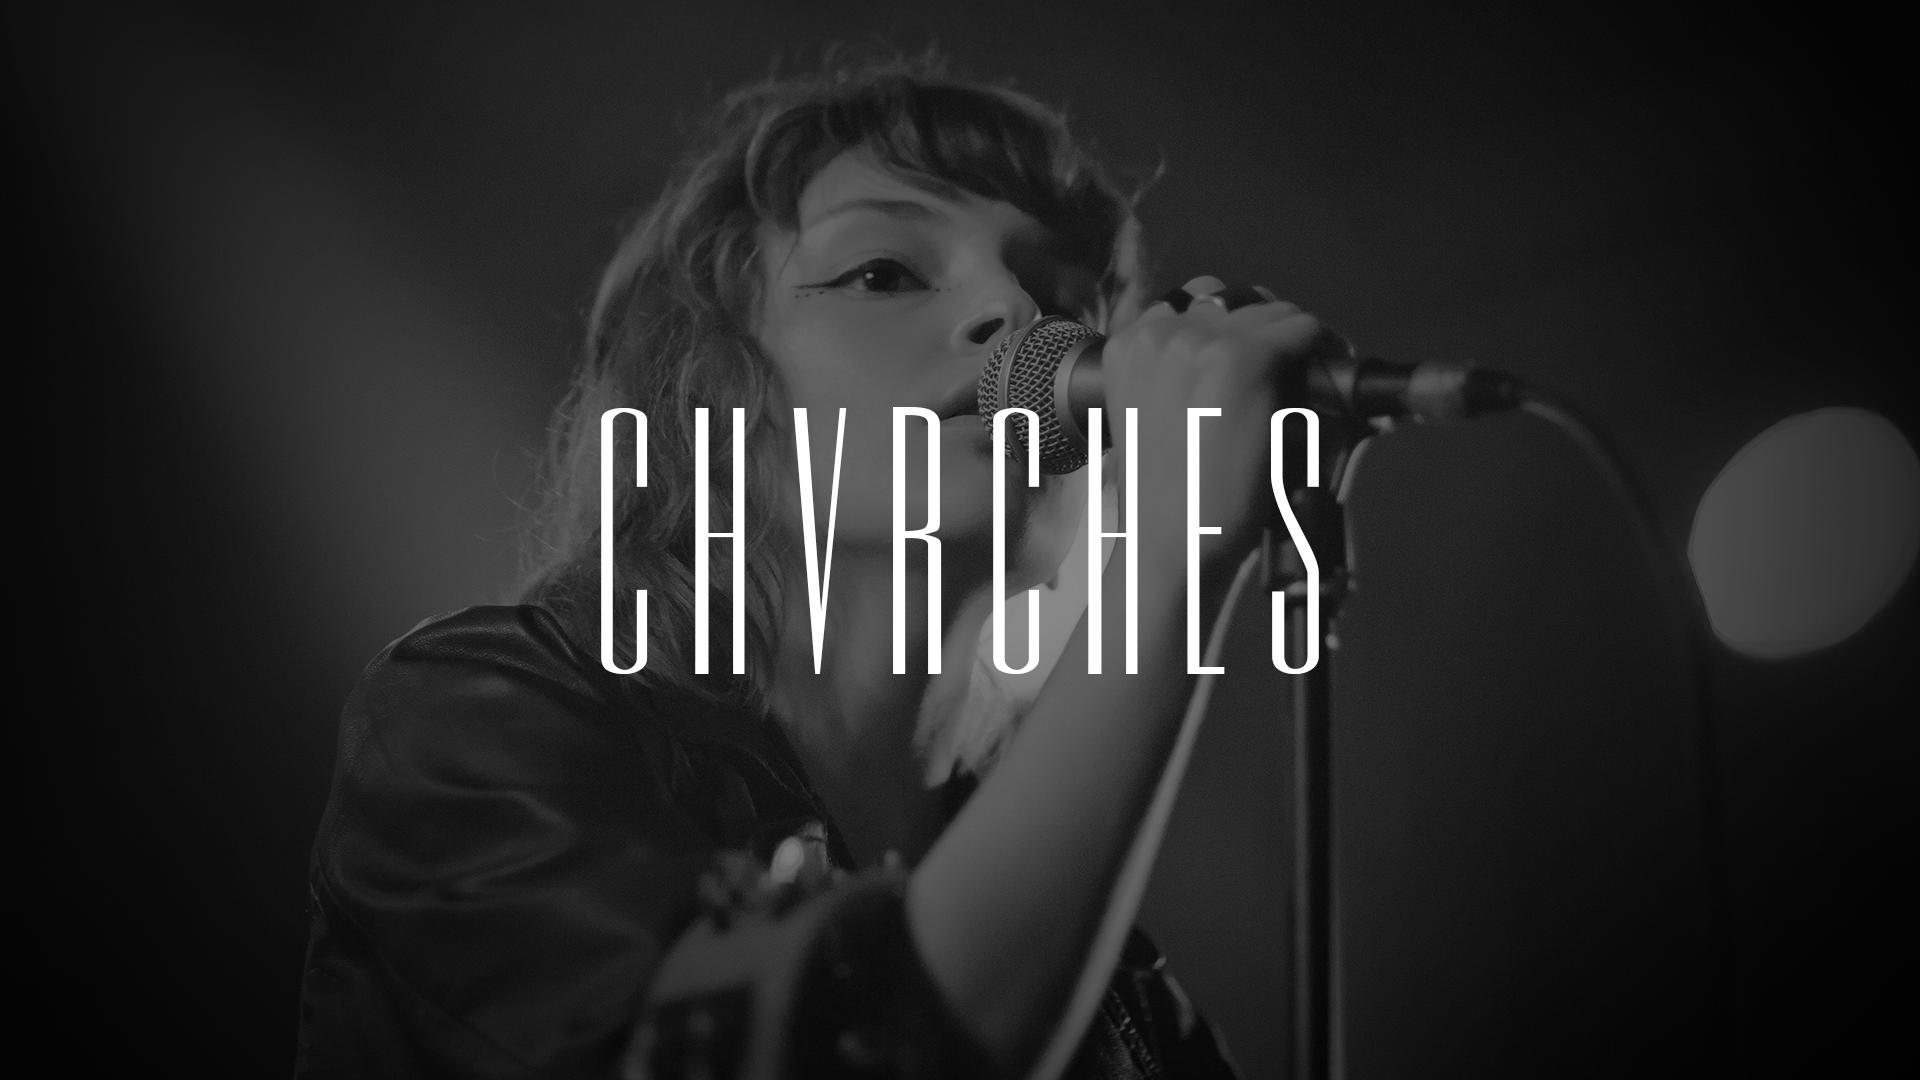 A wallpaper I threw together in Photohop of Lauren Mayberry!